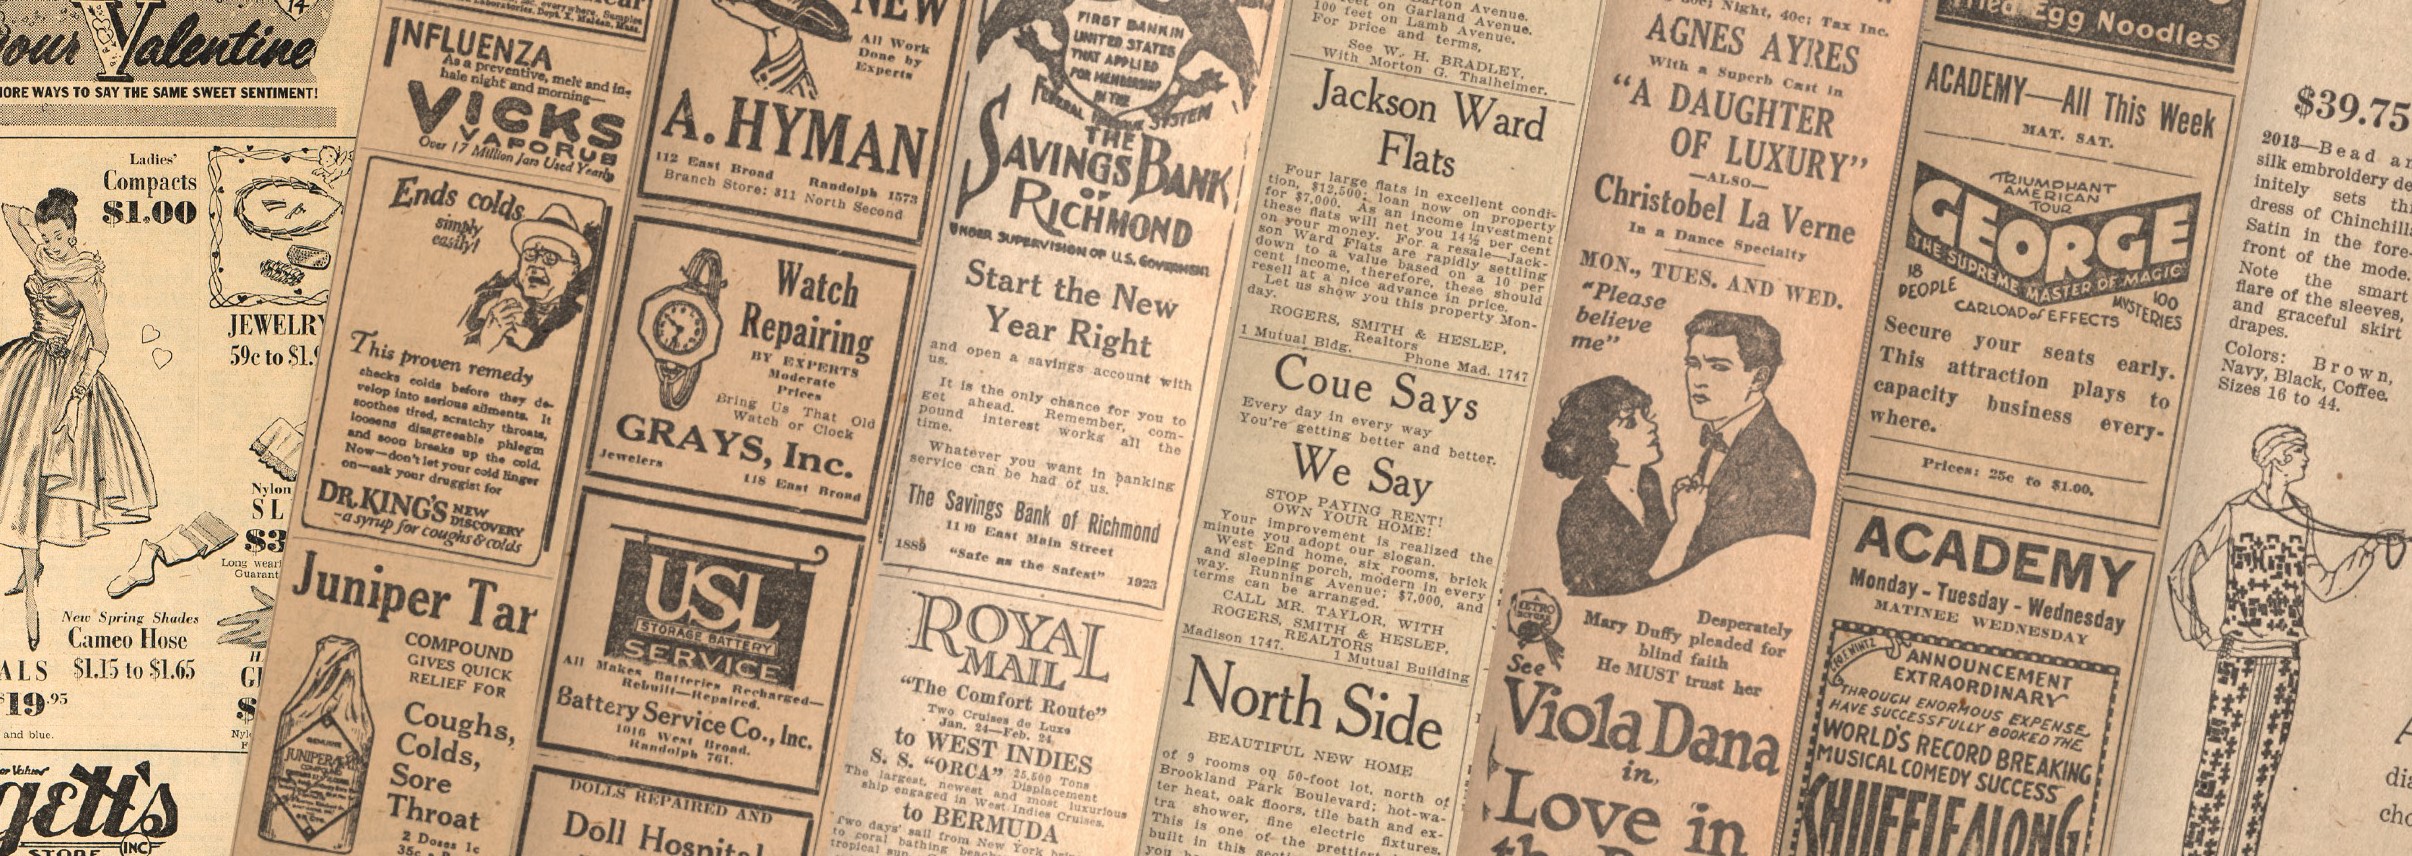 Do you have old Virginia Newspapers?